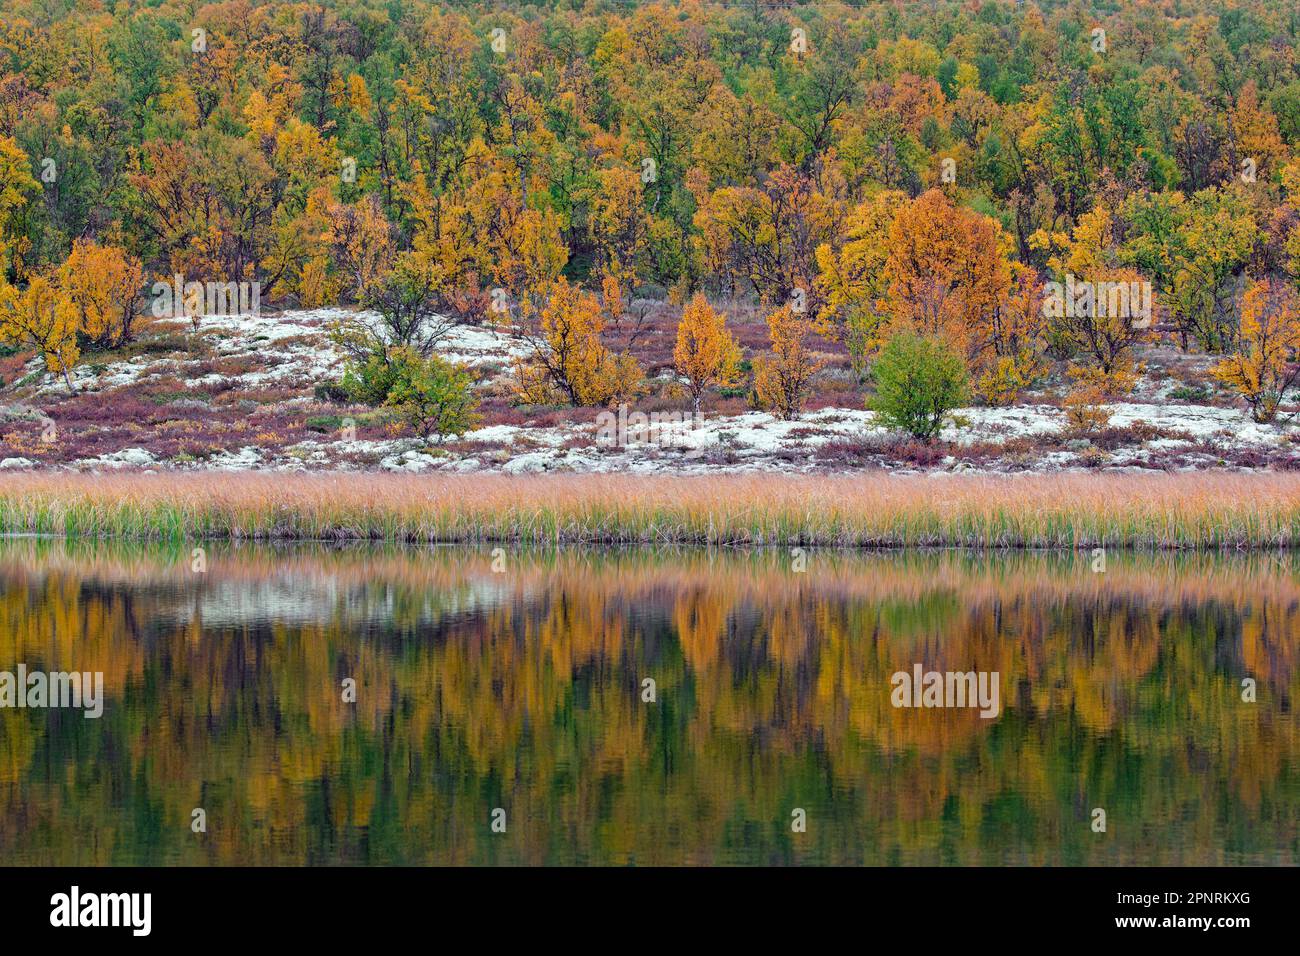 Birch trees showing autumn colours reflected in water of pond in the Fokstumyra Nature Reserve in Dovrefjell, Oppdal, Dovre region, Central Norway Stock Photo